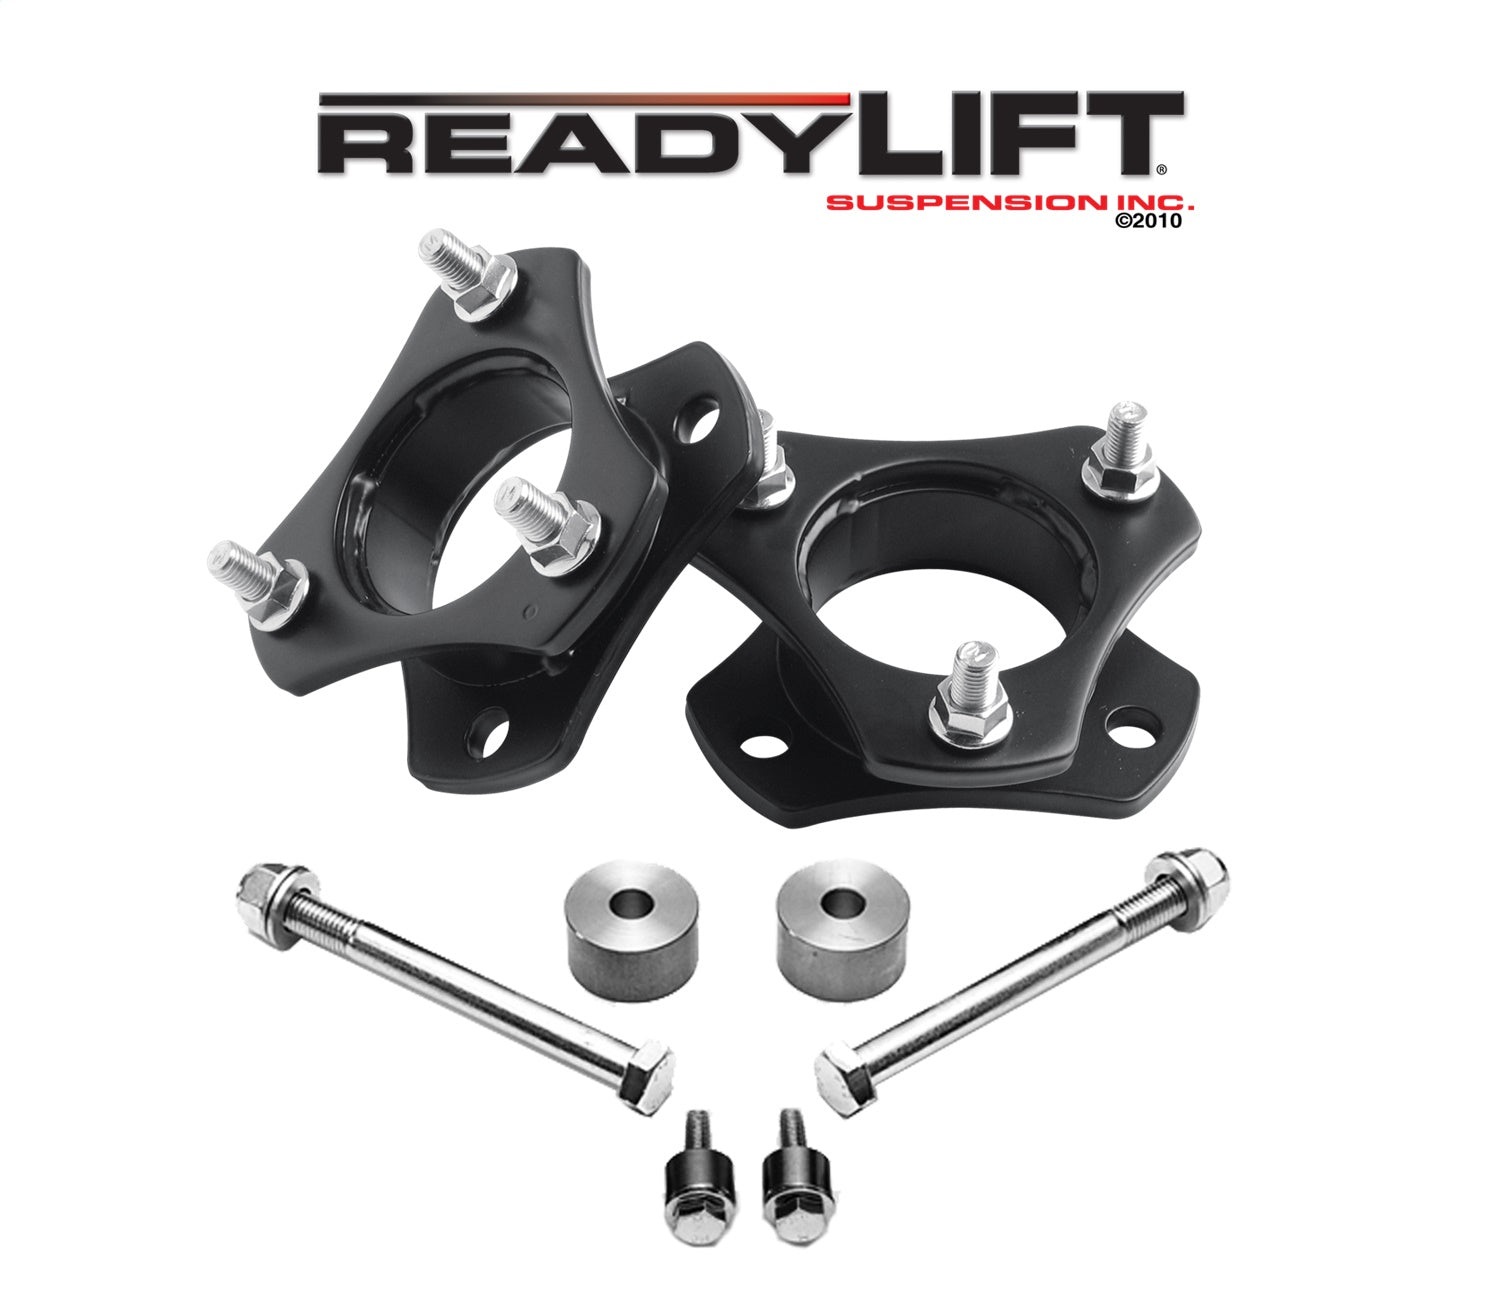 Readylift 66-5000 Strut Extension, Black, for tires up to 33"